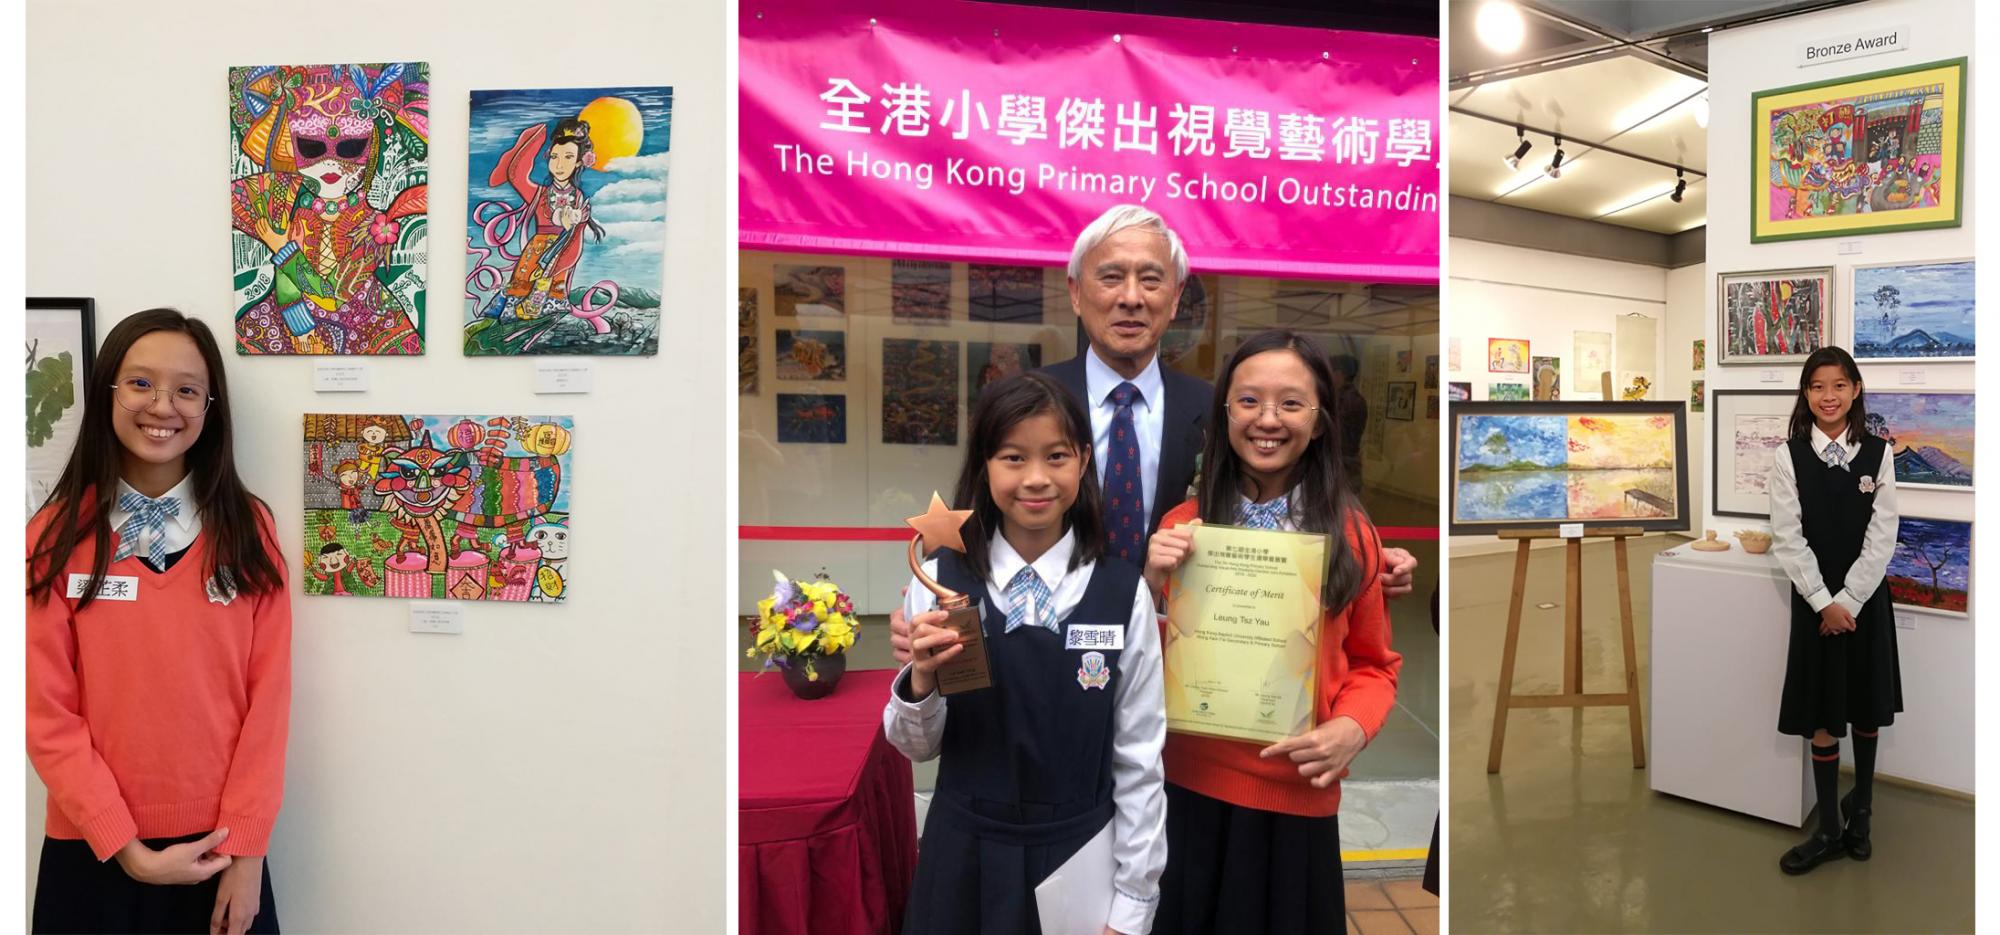 <br />
Students received Bronze and Merit Award in “The 7th Hong Kong Primary School Outstanding Visual Arts Students Election” co-organized by the CEATE Teachers’ Association and the Jockey Club Ti-I College